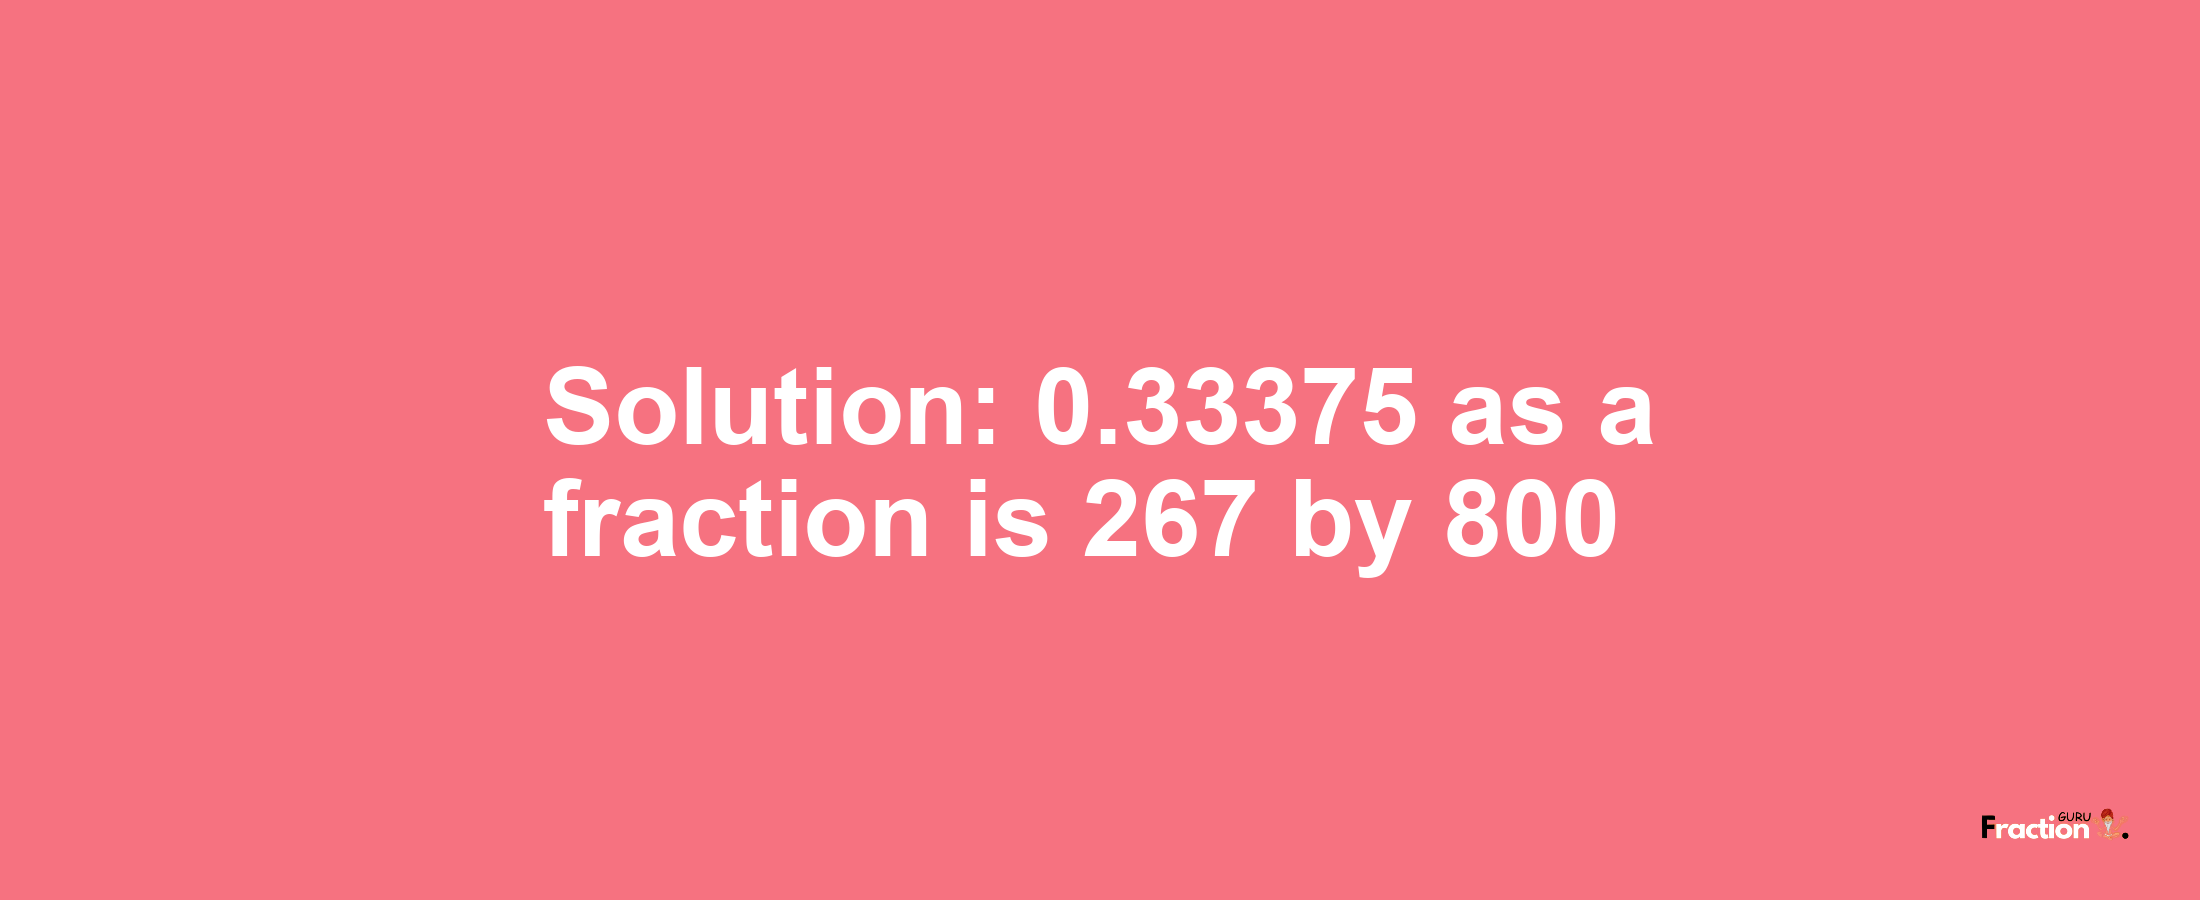 Solution:0.33375 as a fraction is 267/800